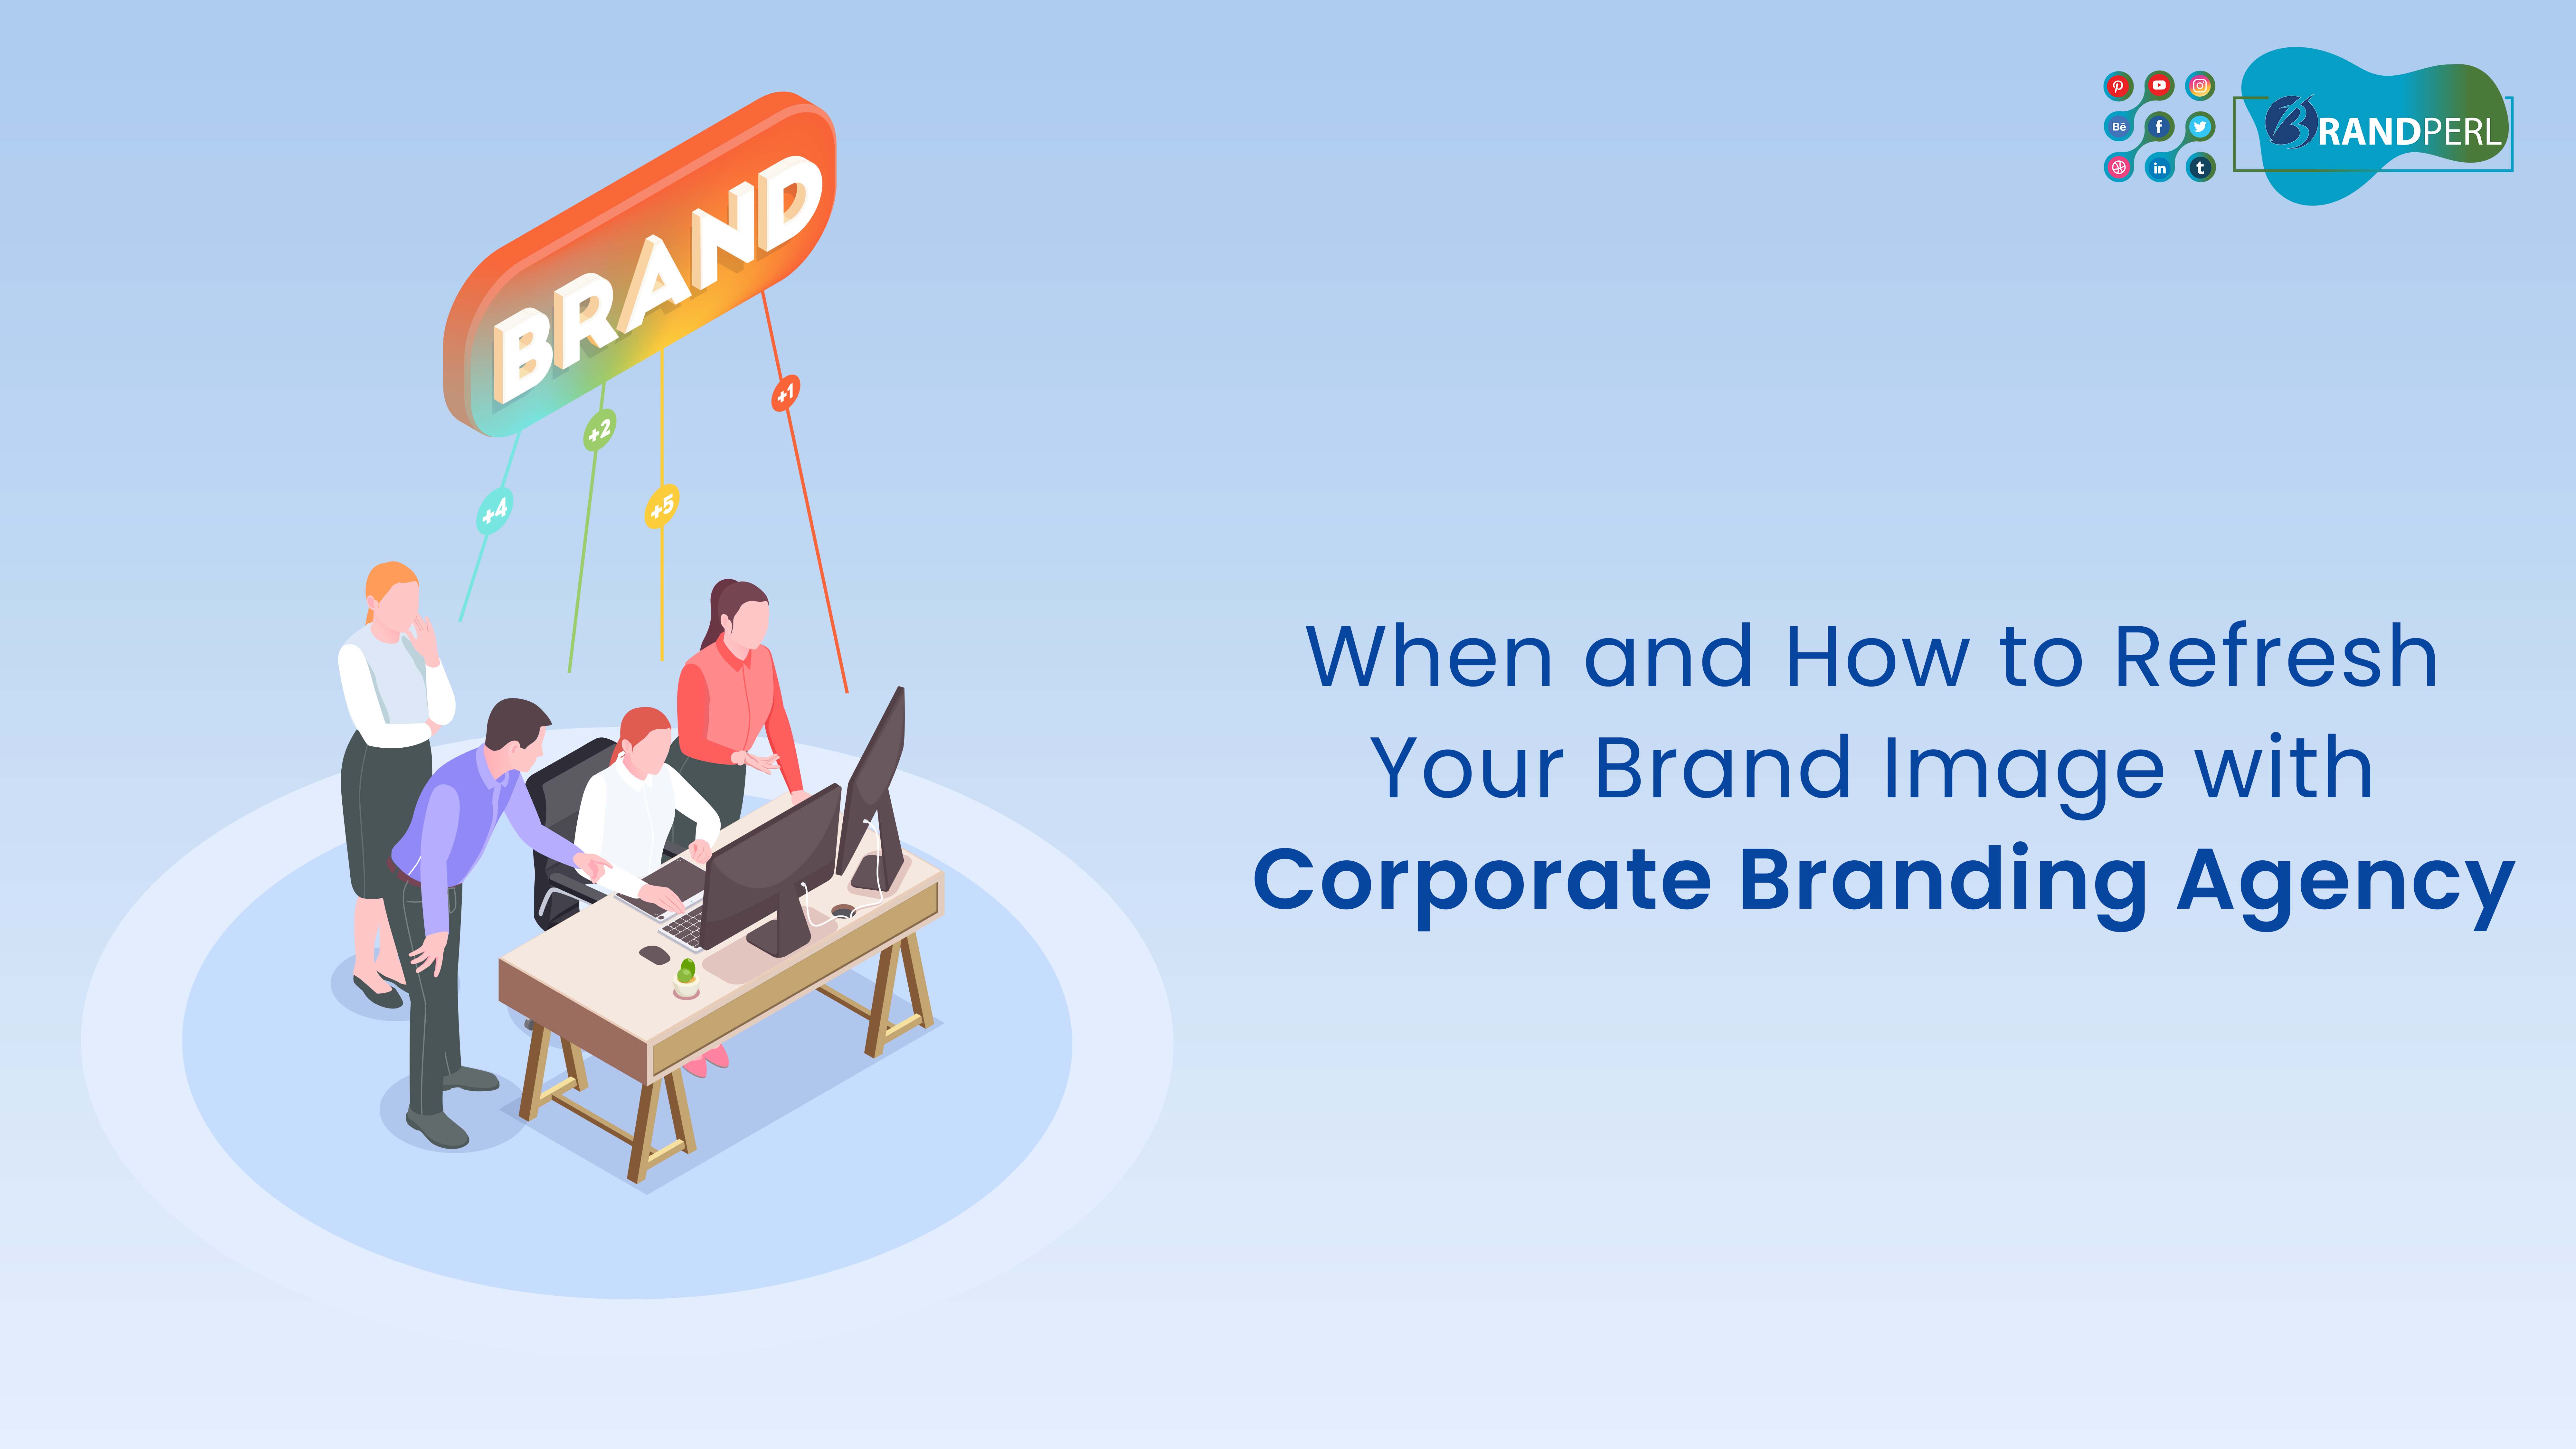 When and How to Refresh Your Brand Image with Corporate Branding Agency